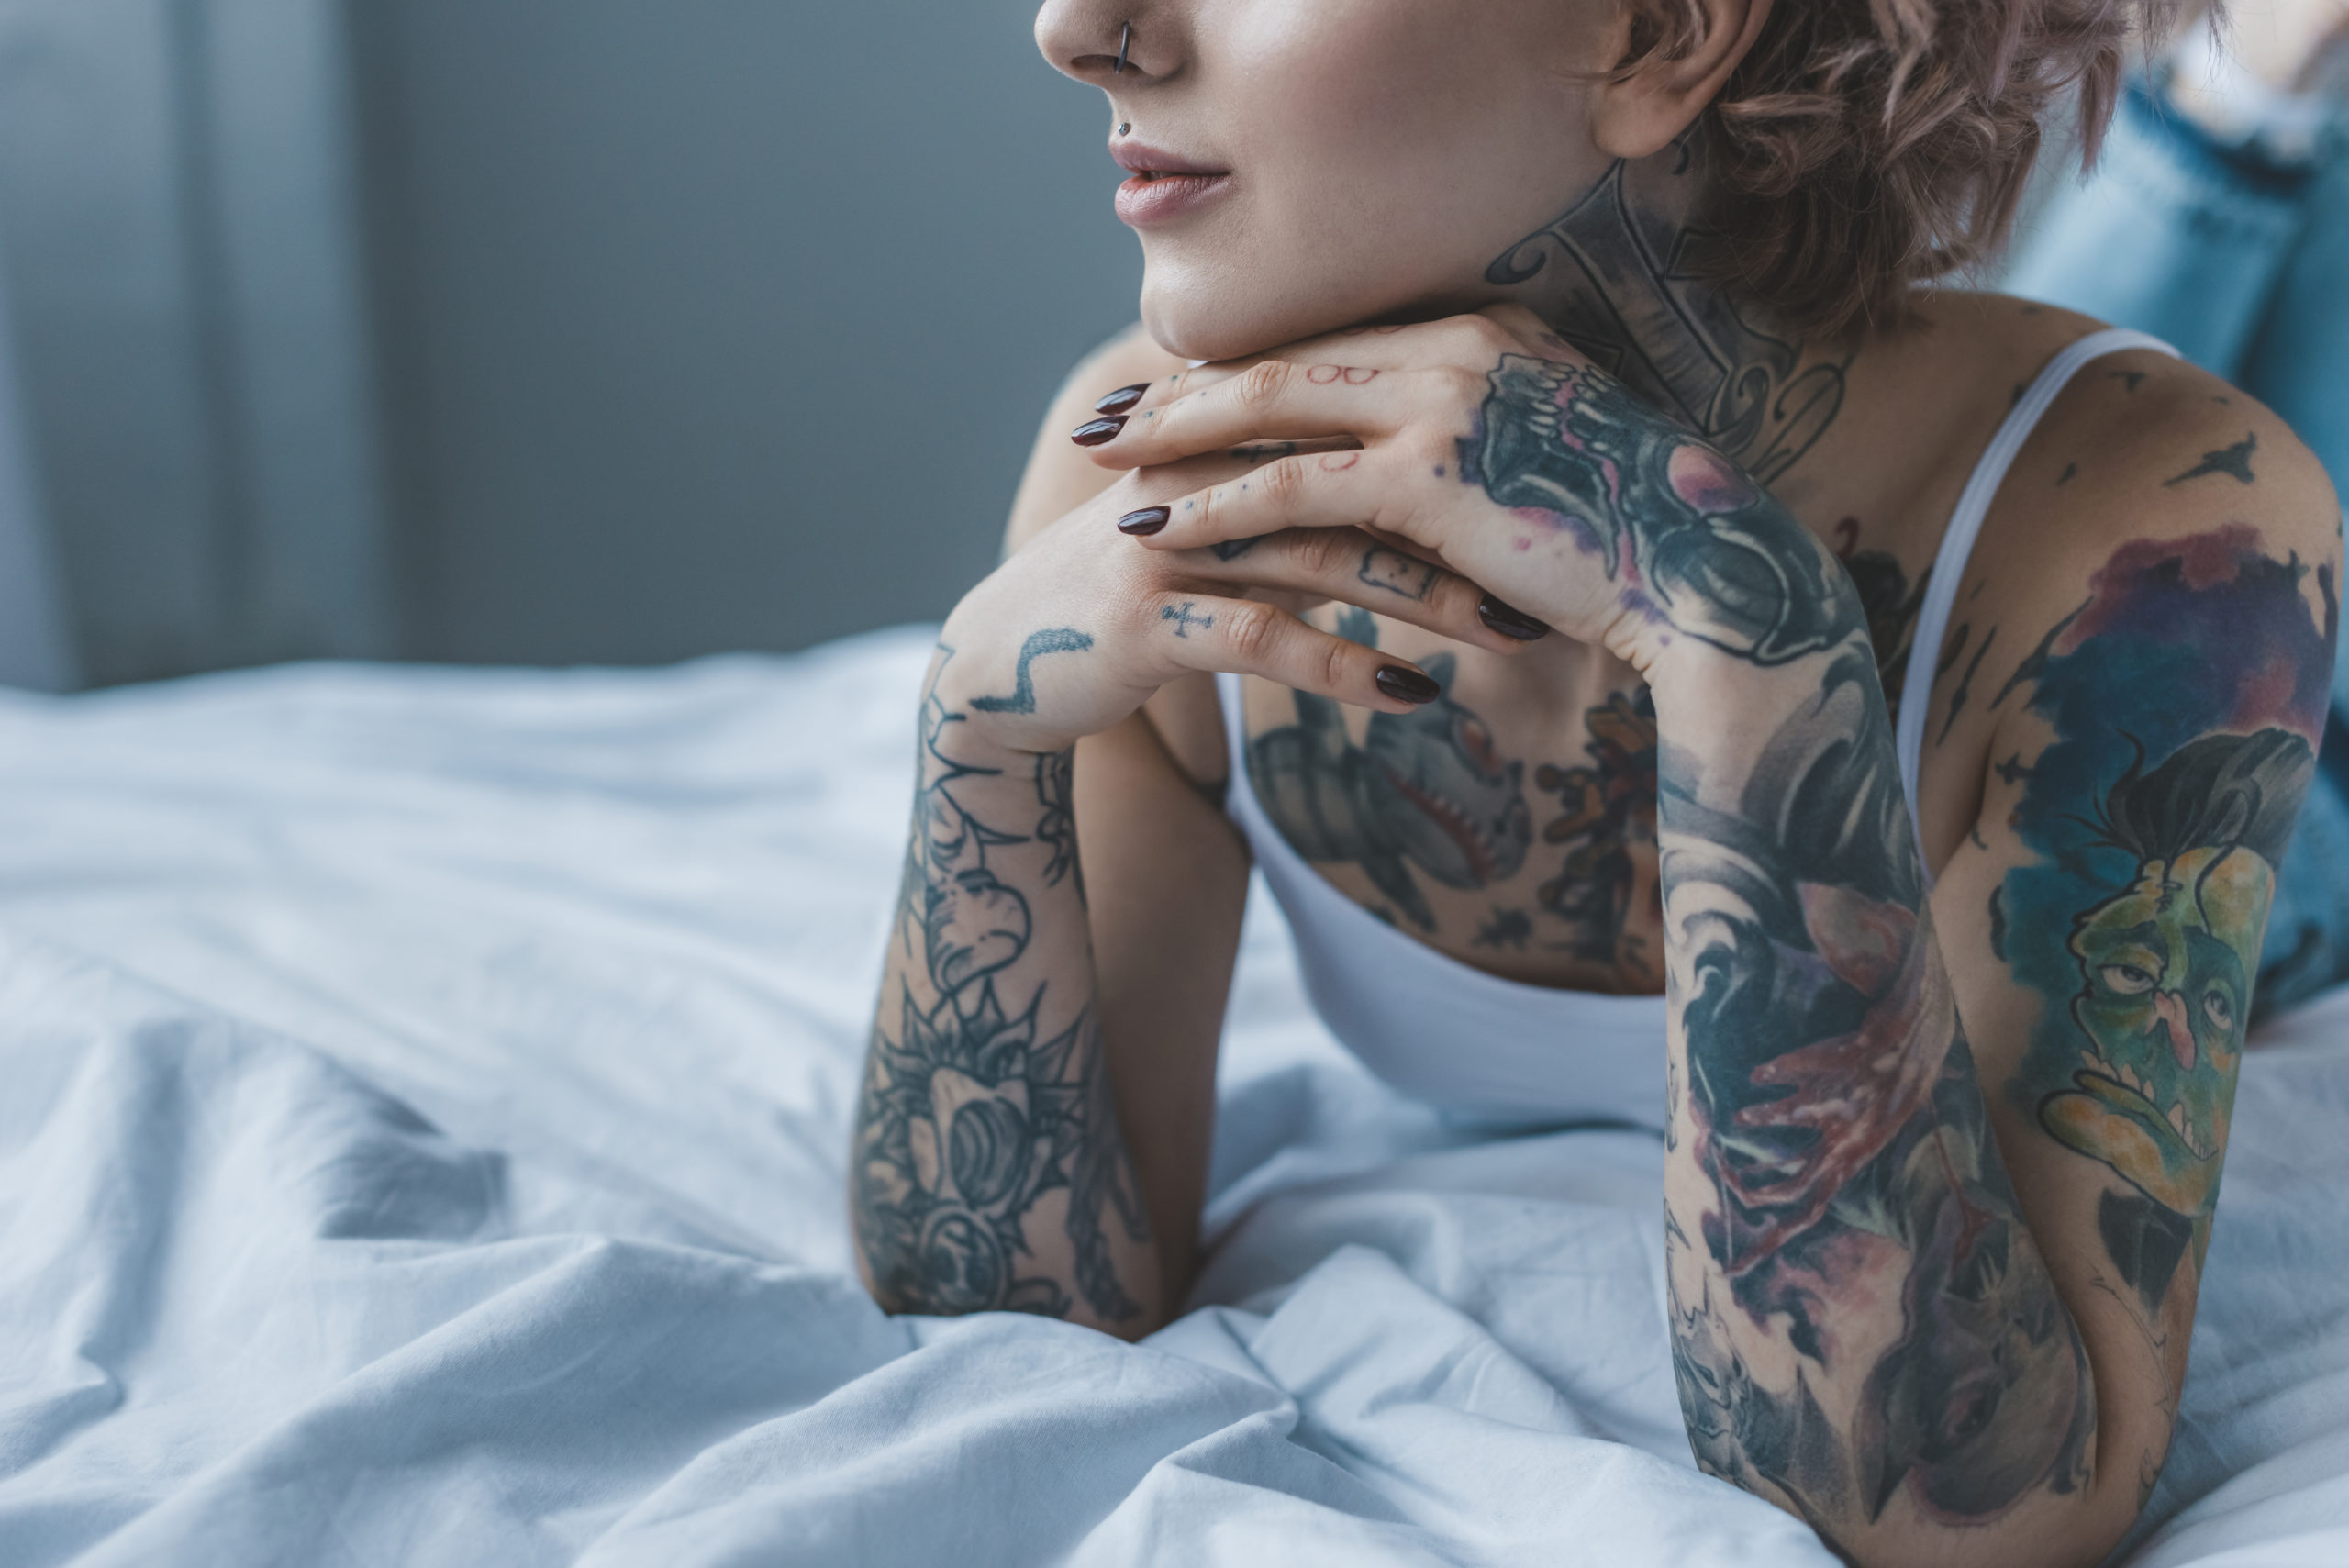 Does Tattoos Affect an Actor’s Career